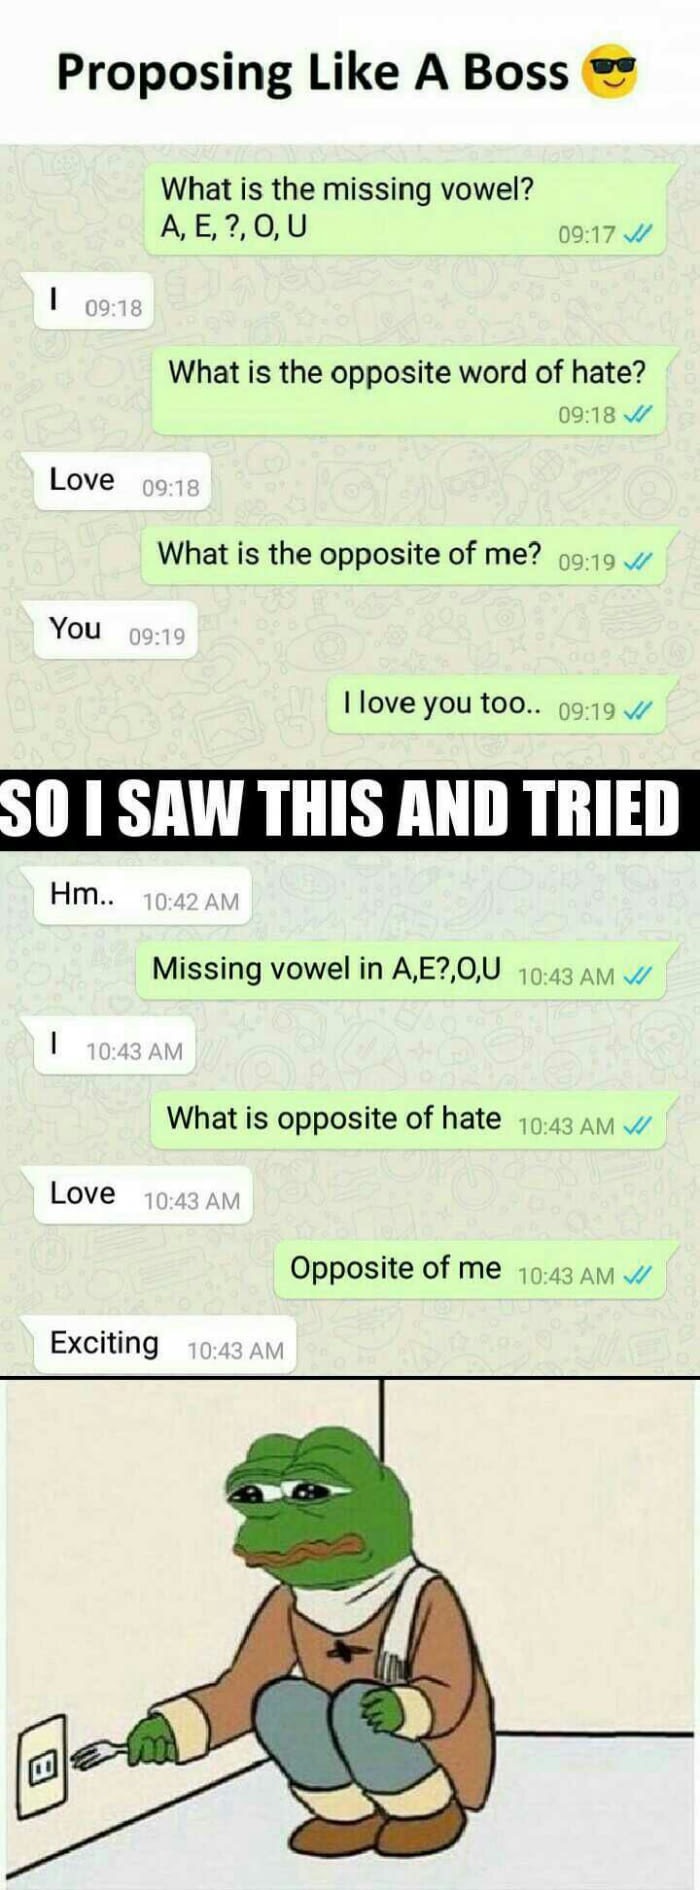 meme stream - proposing like a boss - Proposing A Boss What is the missing vowel? A, E, ?, O, U V What is the opposite word of hate? V Love What is the opposite of me? You I love you too.. V So I Saw This And Tried Hm.. Missing vowel in A,E?,O,U | What is